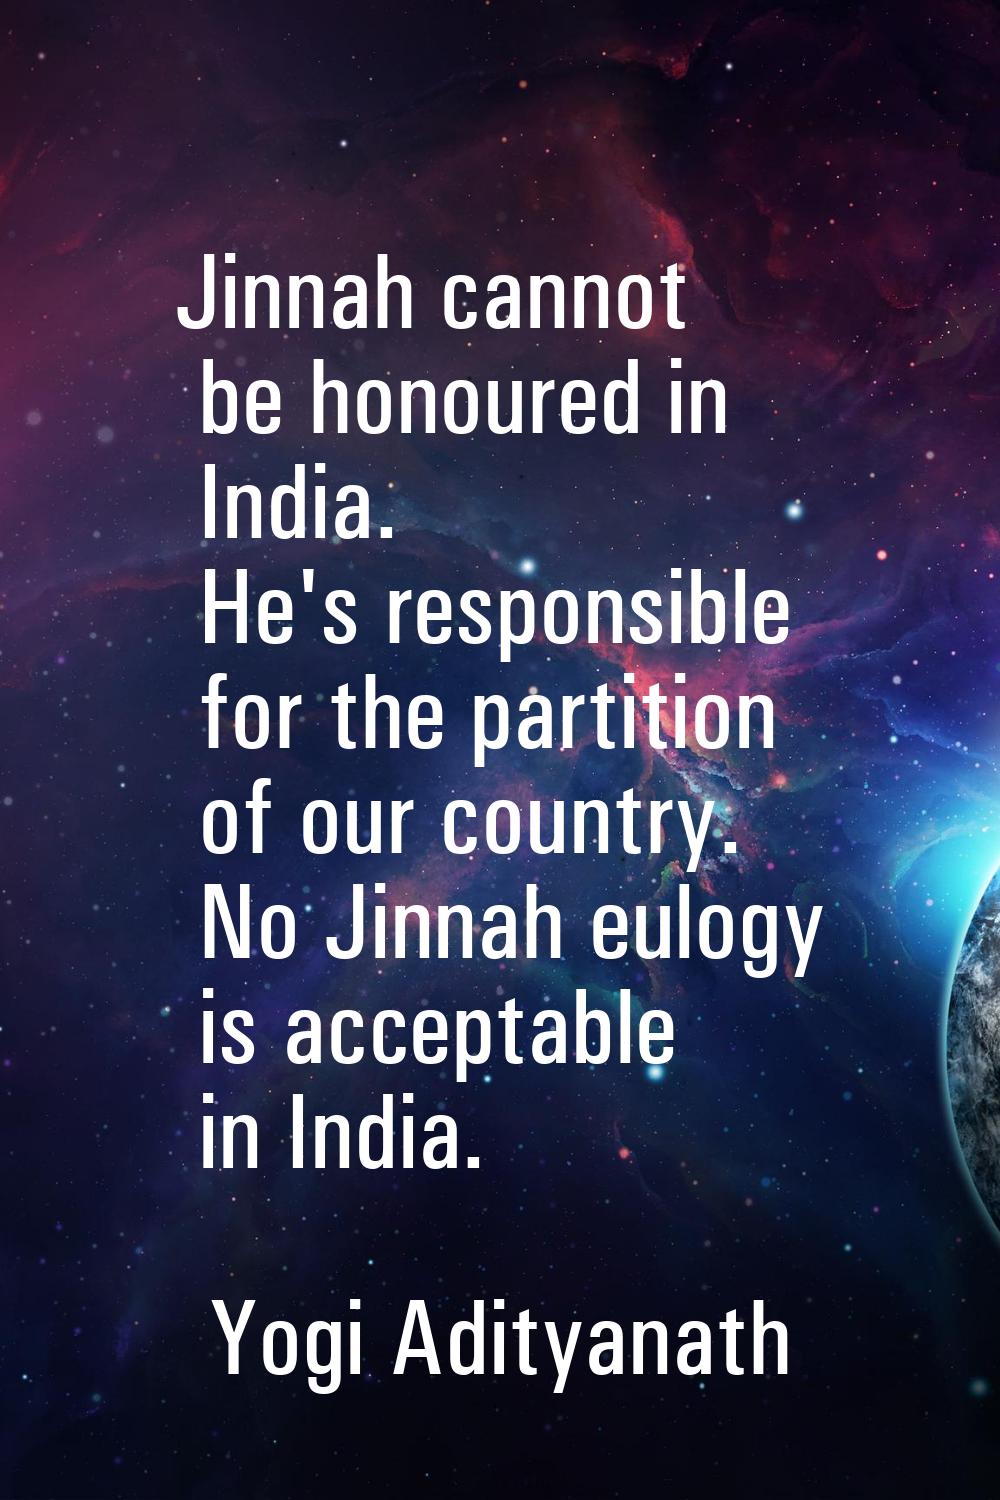 Jinnah cannot be honoured in India. He's responsible for the partition of our country. No Jinnah eu